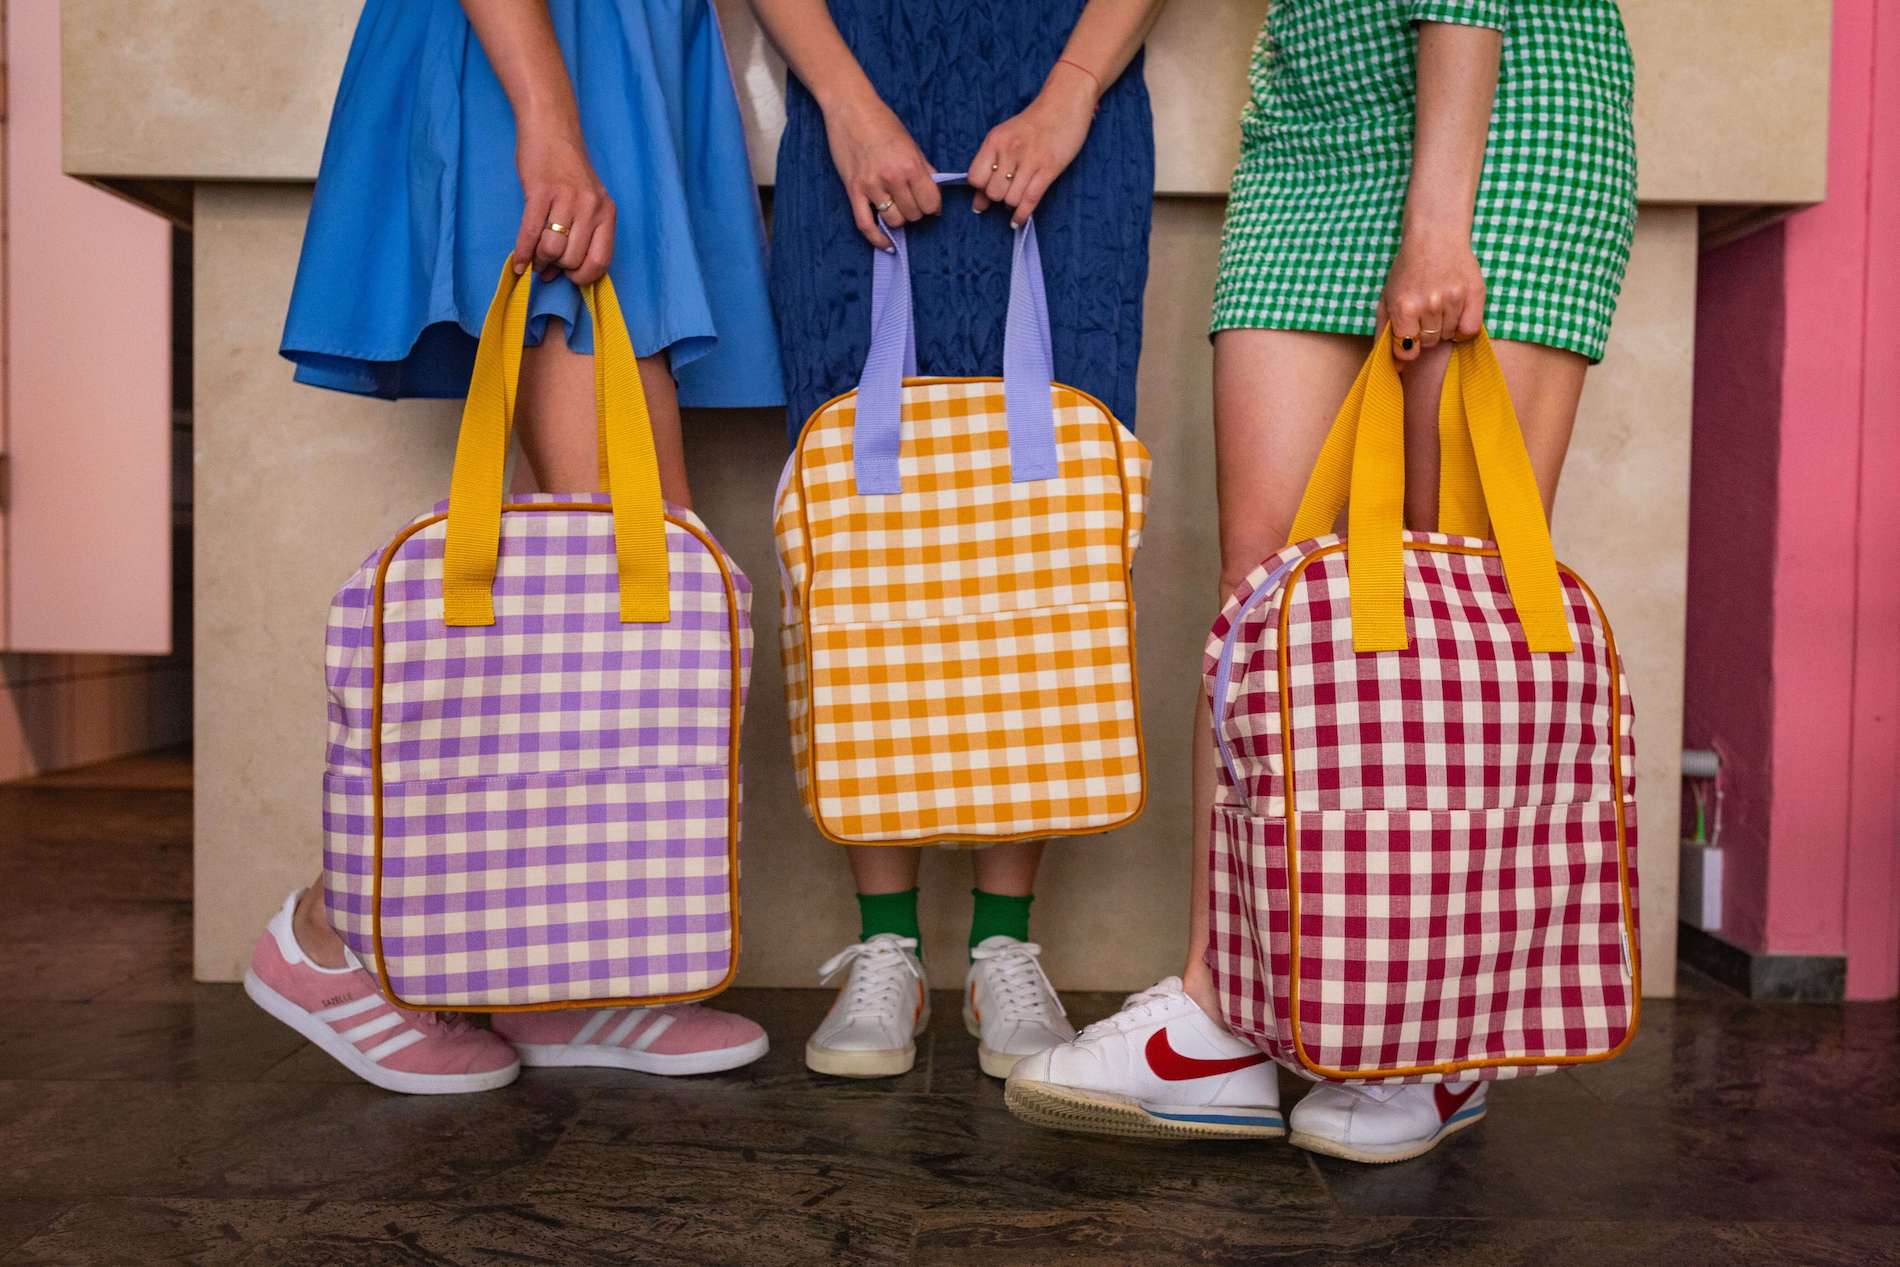 three girls colorfully dressed in restaurant with gingham backpacks by bettys home in hand. checkered city backpacks